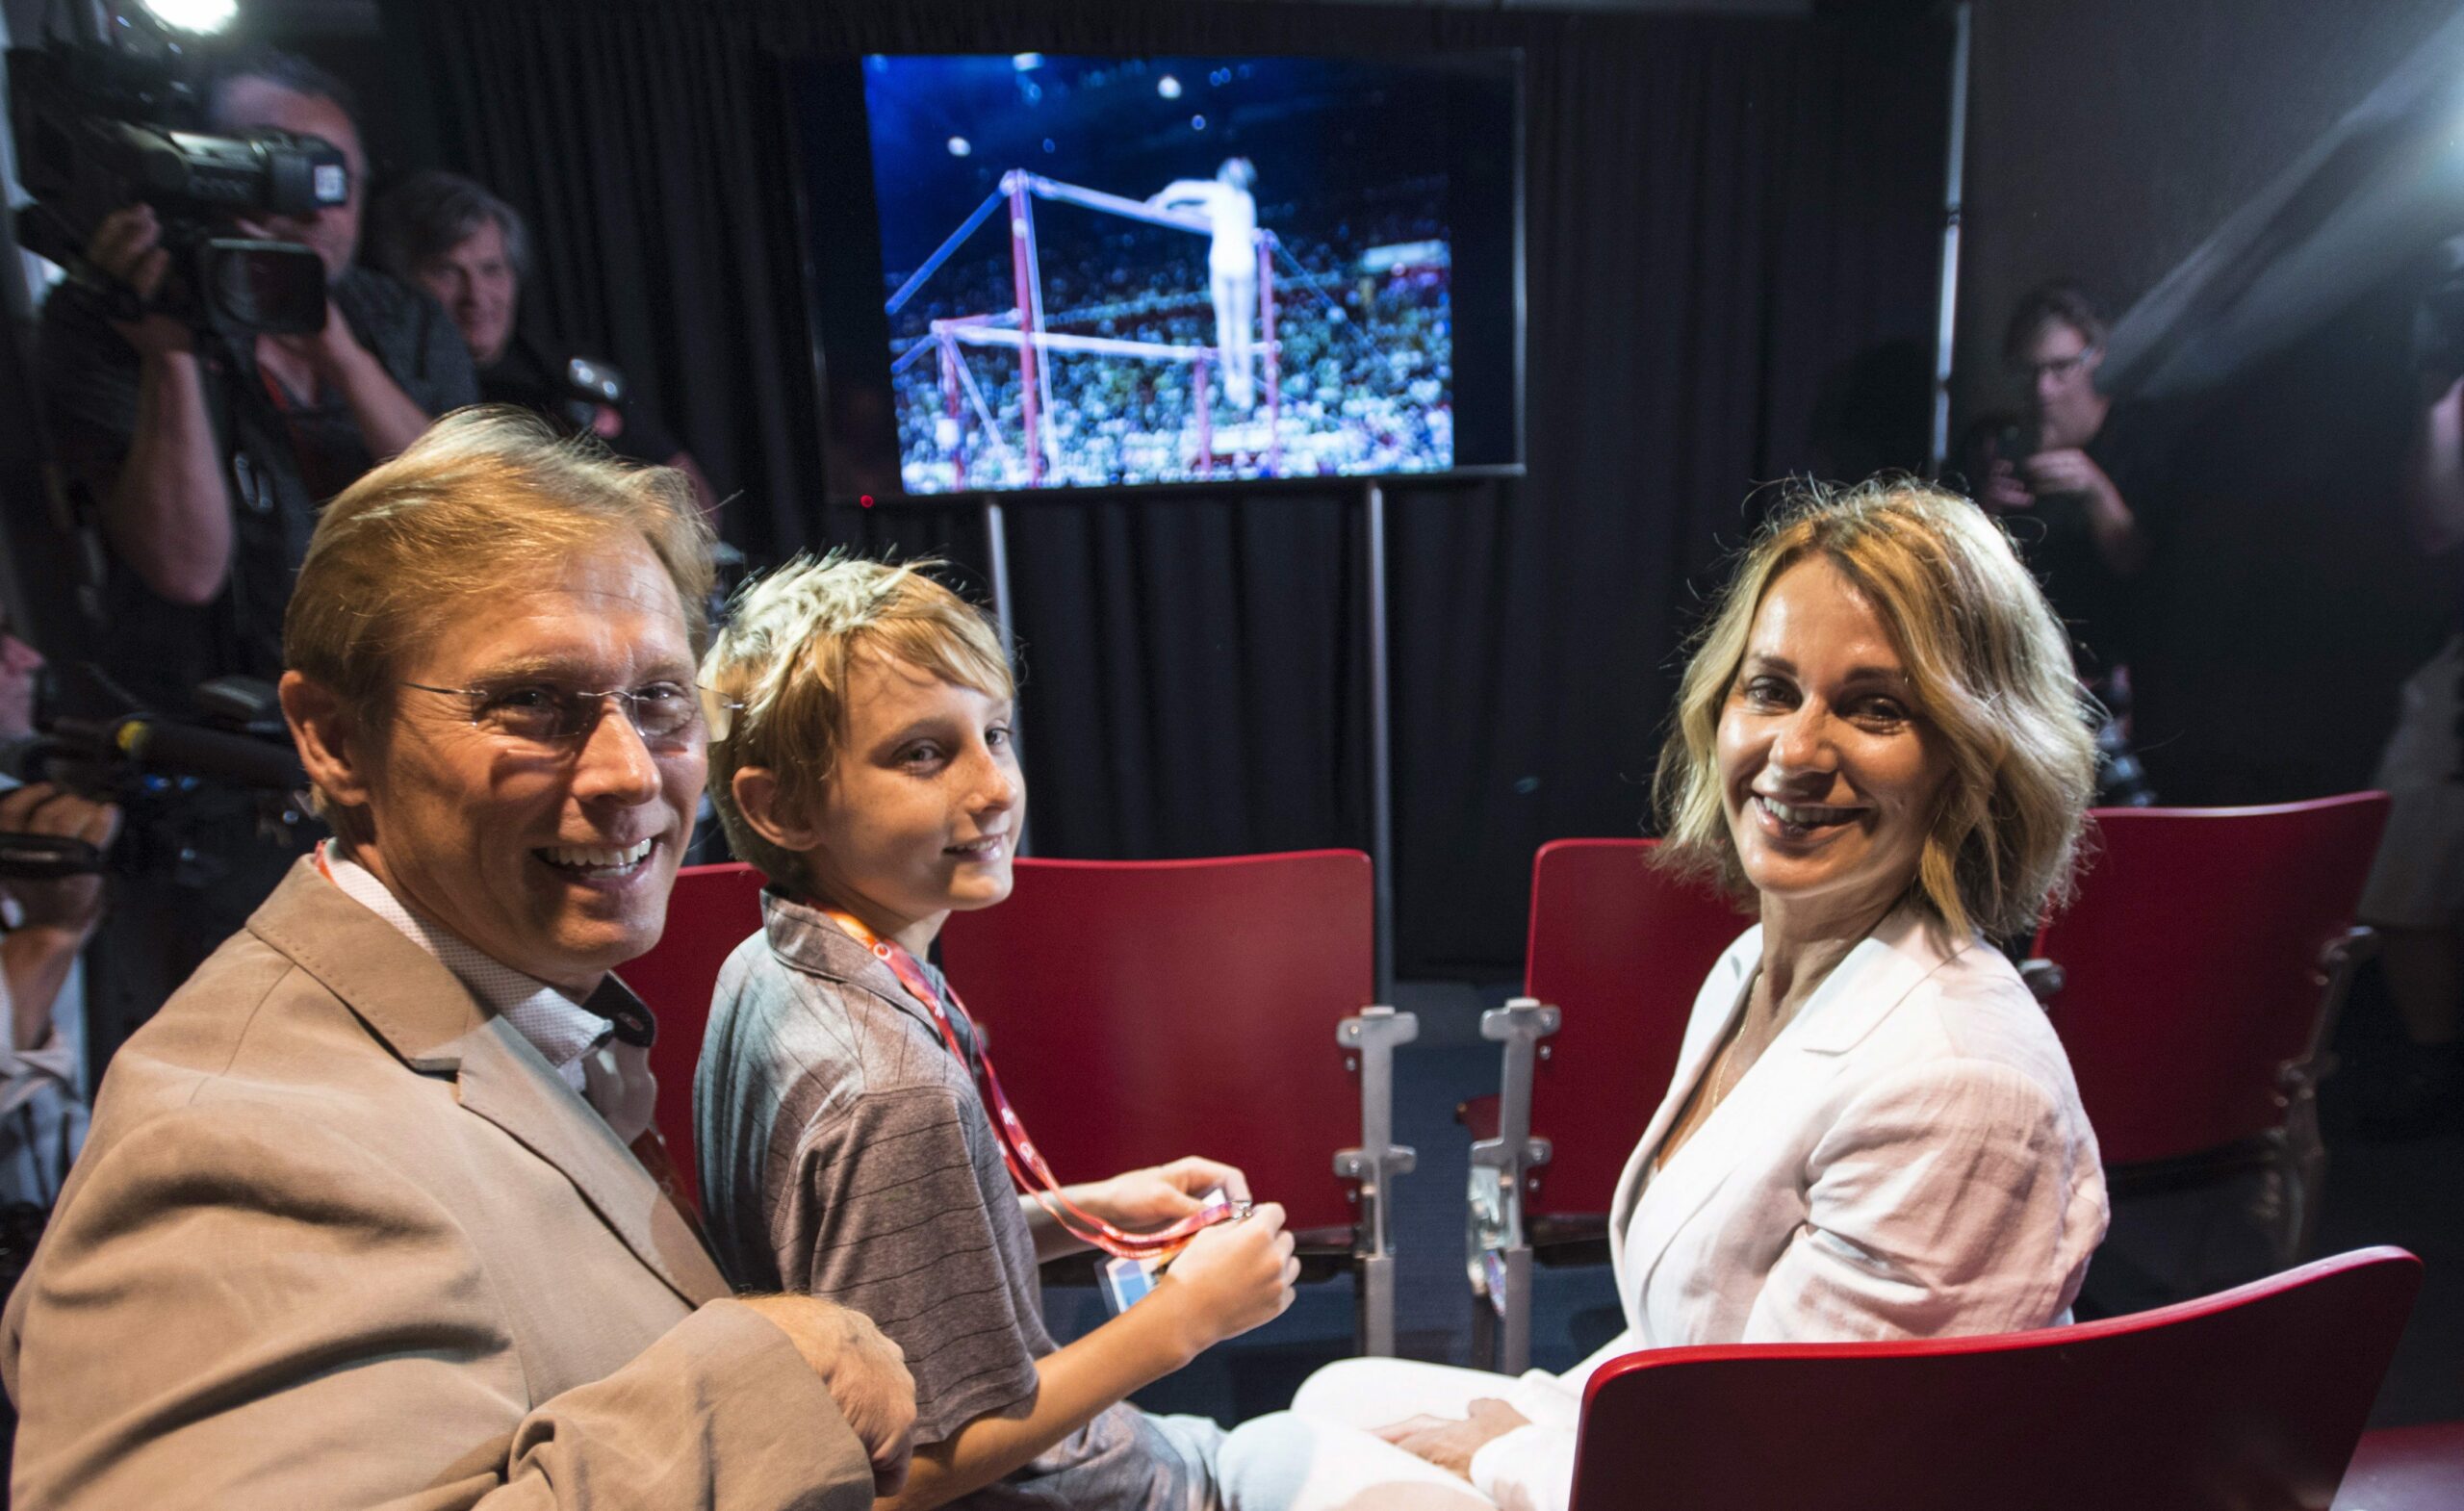 Montreal 1976 Olympics gymnastics champion Nadia Comaneci, her husband Bart Conner and their son Dylan watch a video of her competing as she tours a exhibit marking the 40th anniversary of the Games Thursday, July 21, 2016 in Montreal. Photo by Paul Chiasson/The Canadian Press/ ABACAPRESS.COM